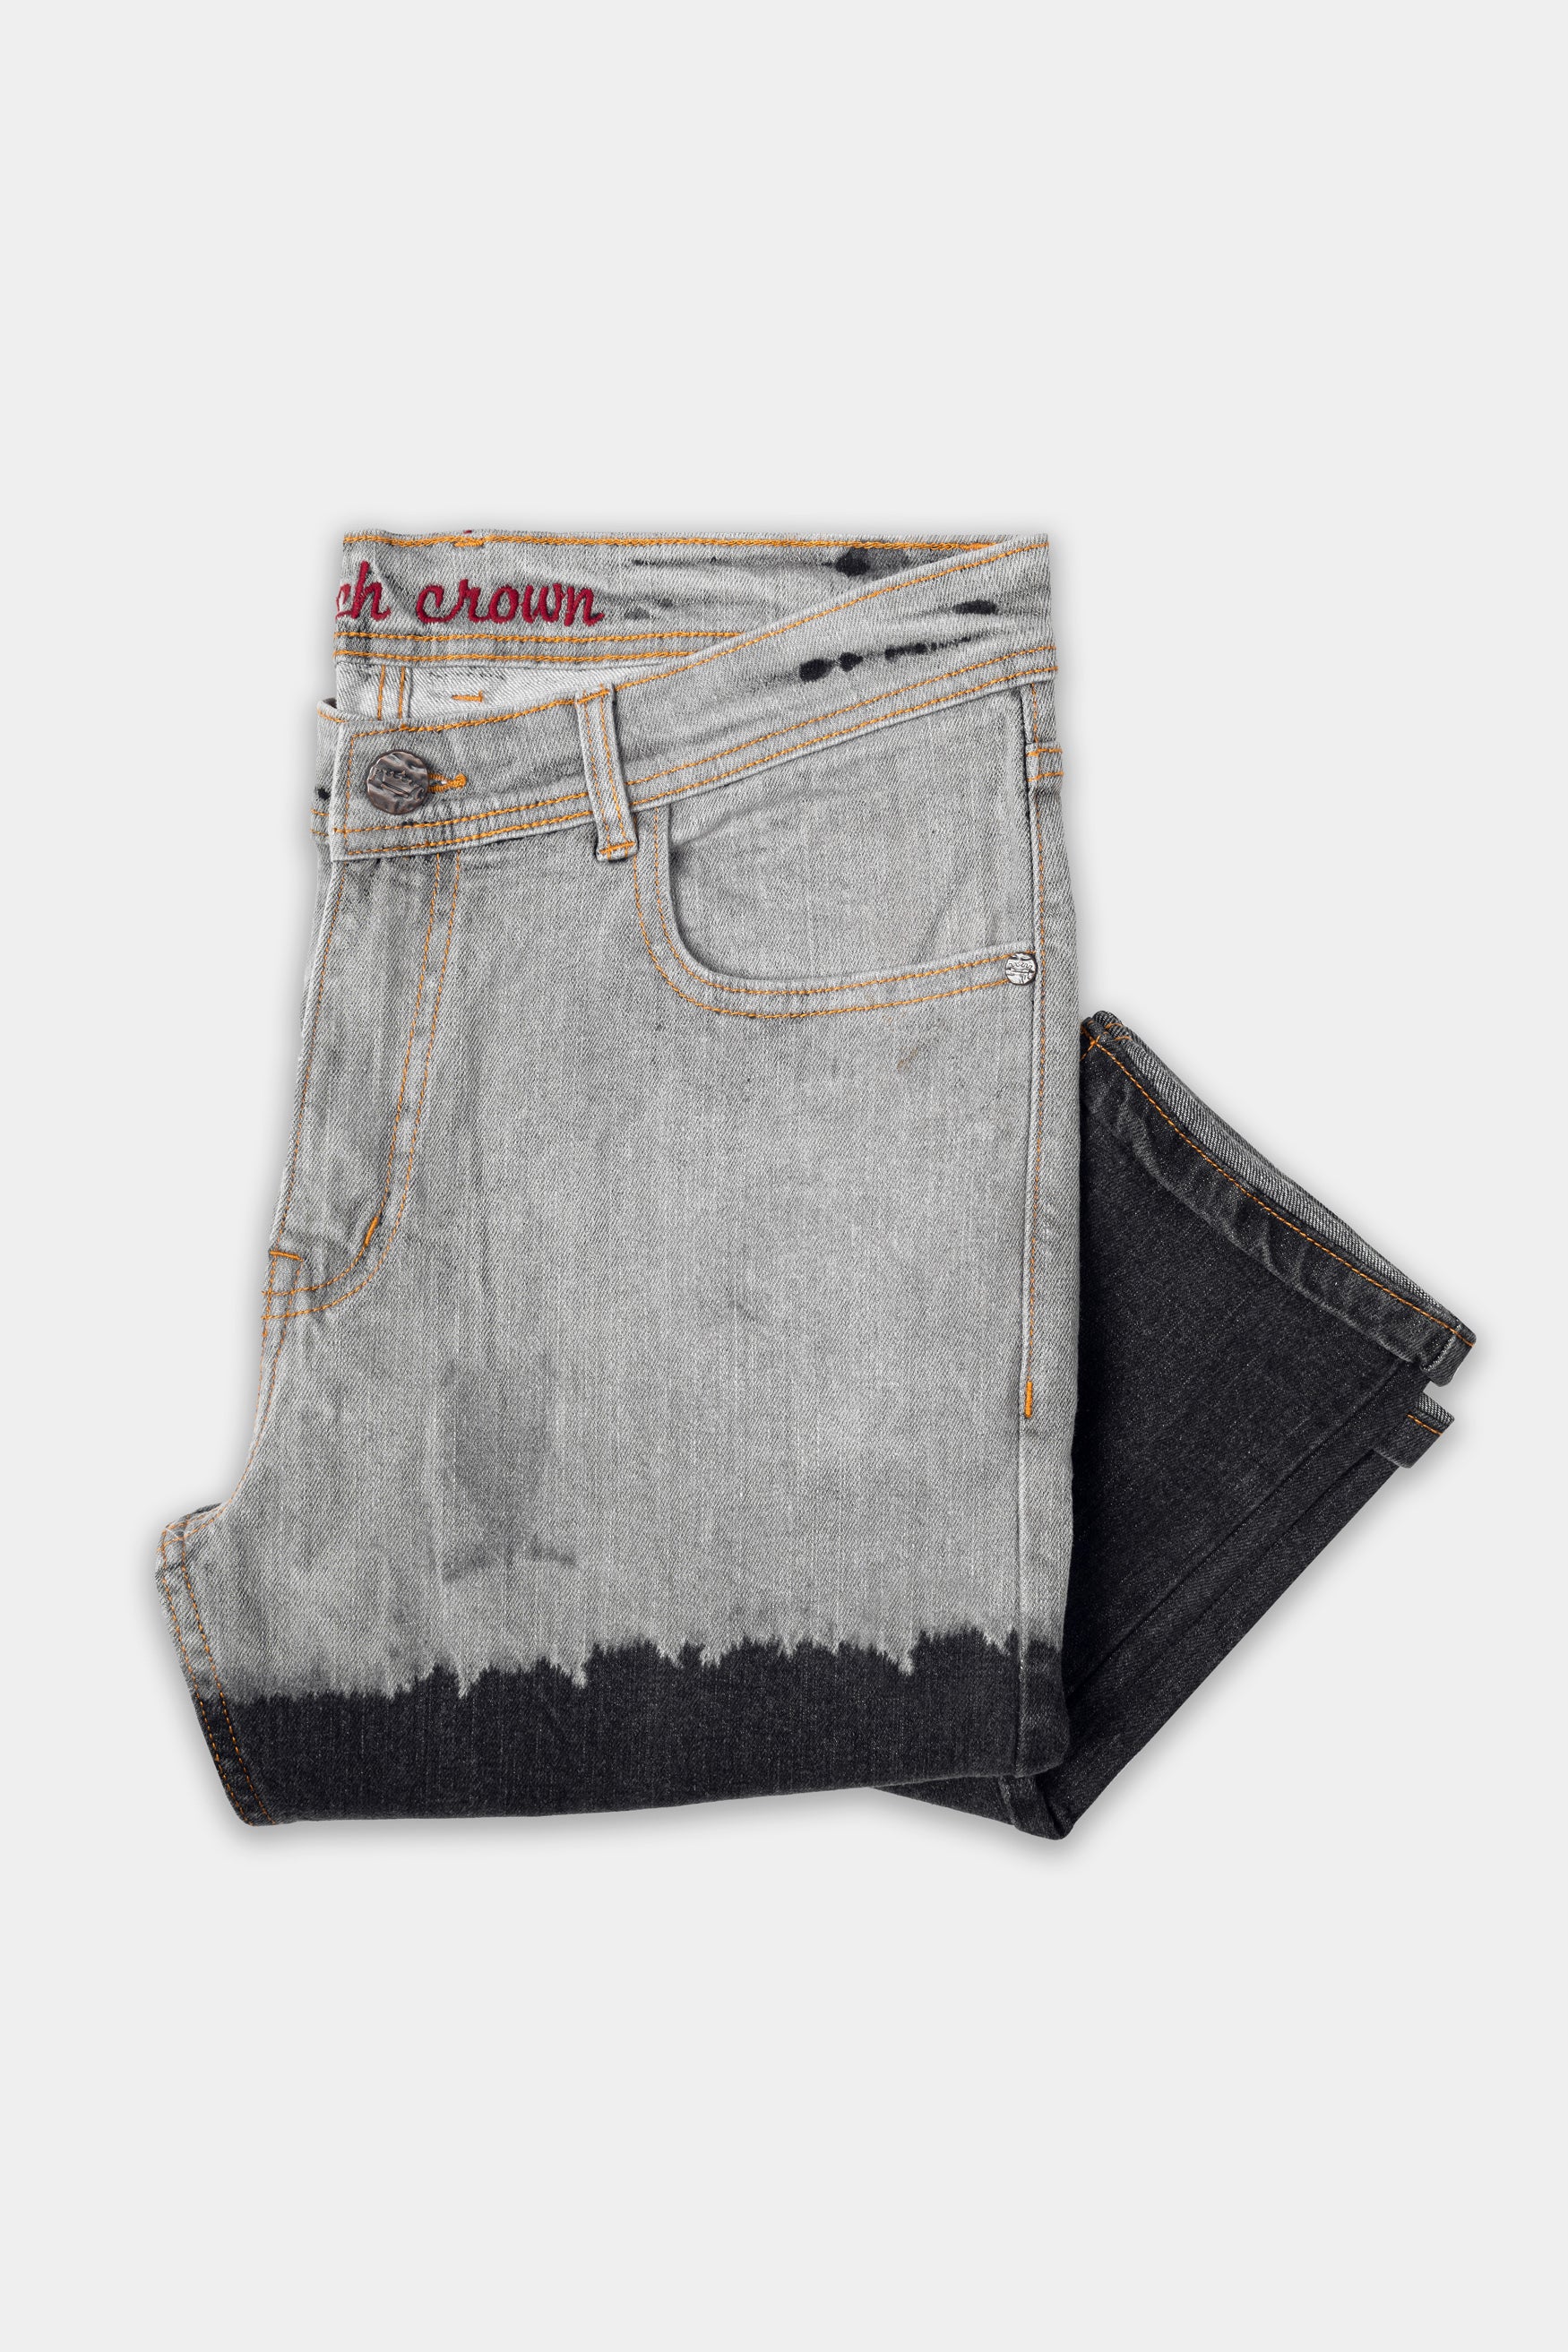 Martini Gray and Shark Black Heavily Washed Stretchable Denim